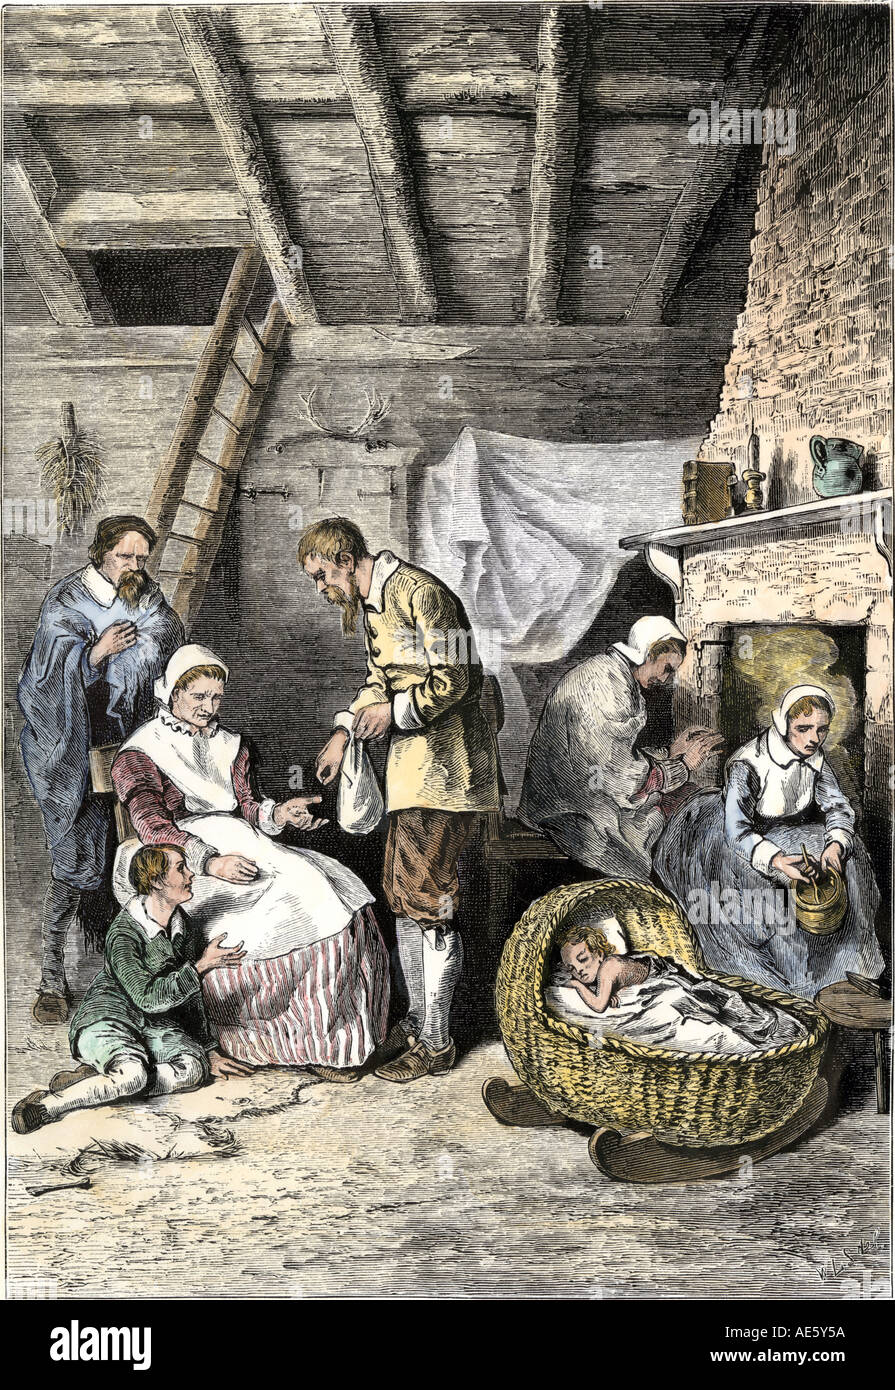 Jamestown colonists dealing out the last 5 kernels of corn during the Starving Time 1600s. Hand-colored woodcut Stock Photo